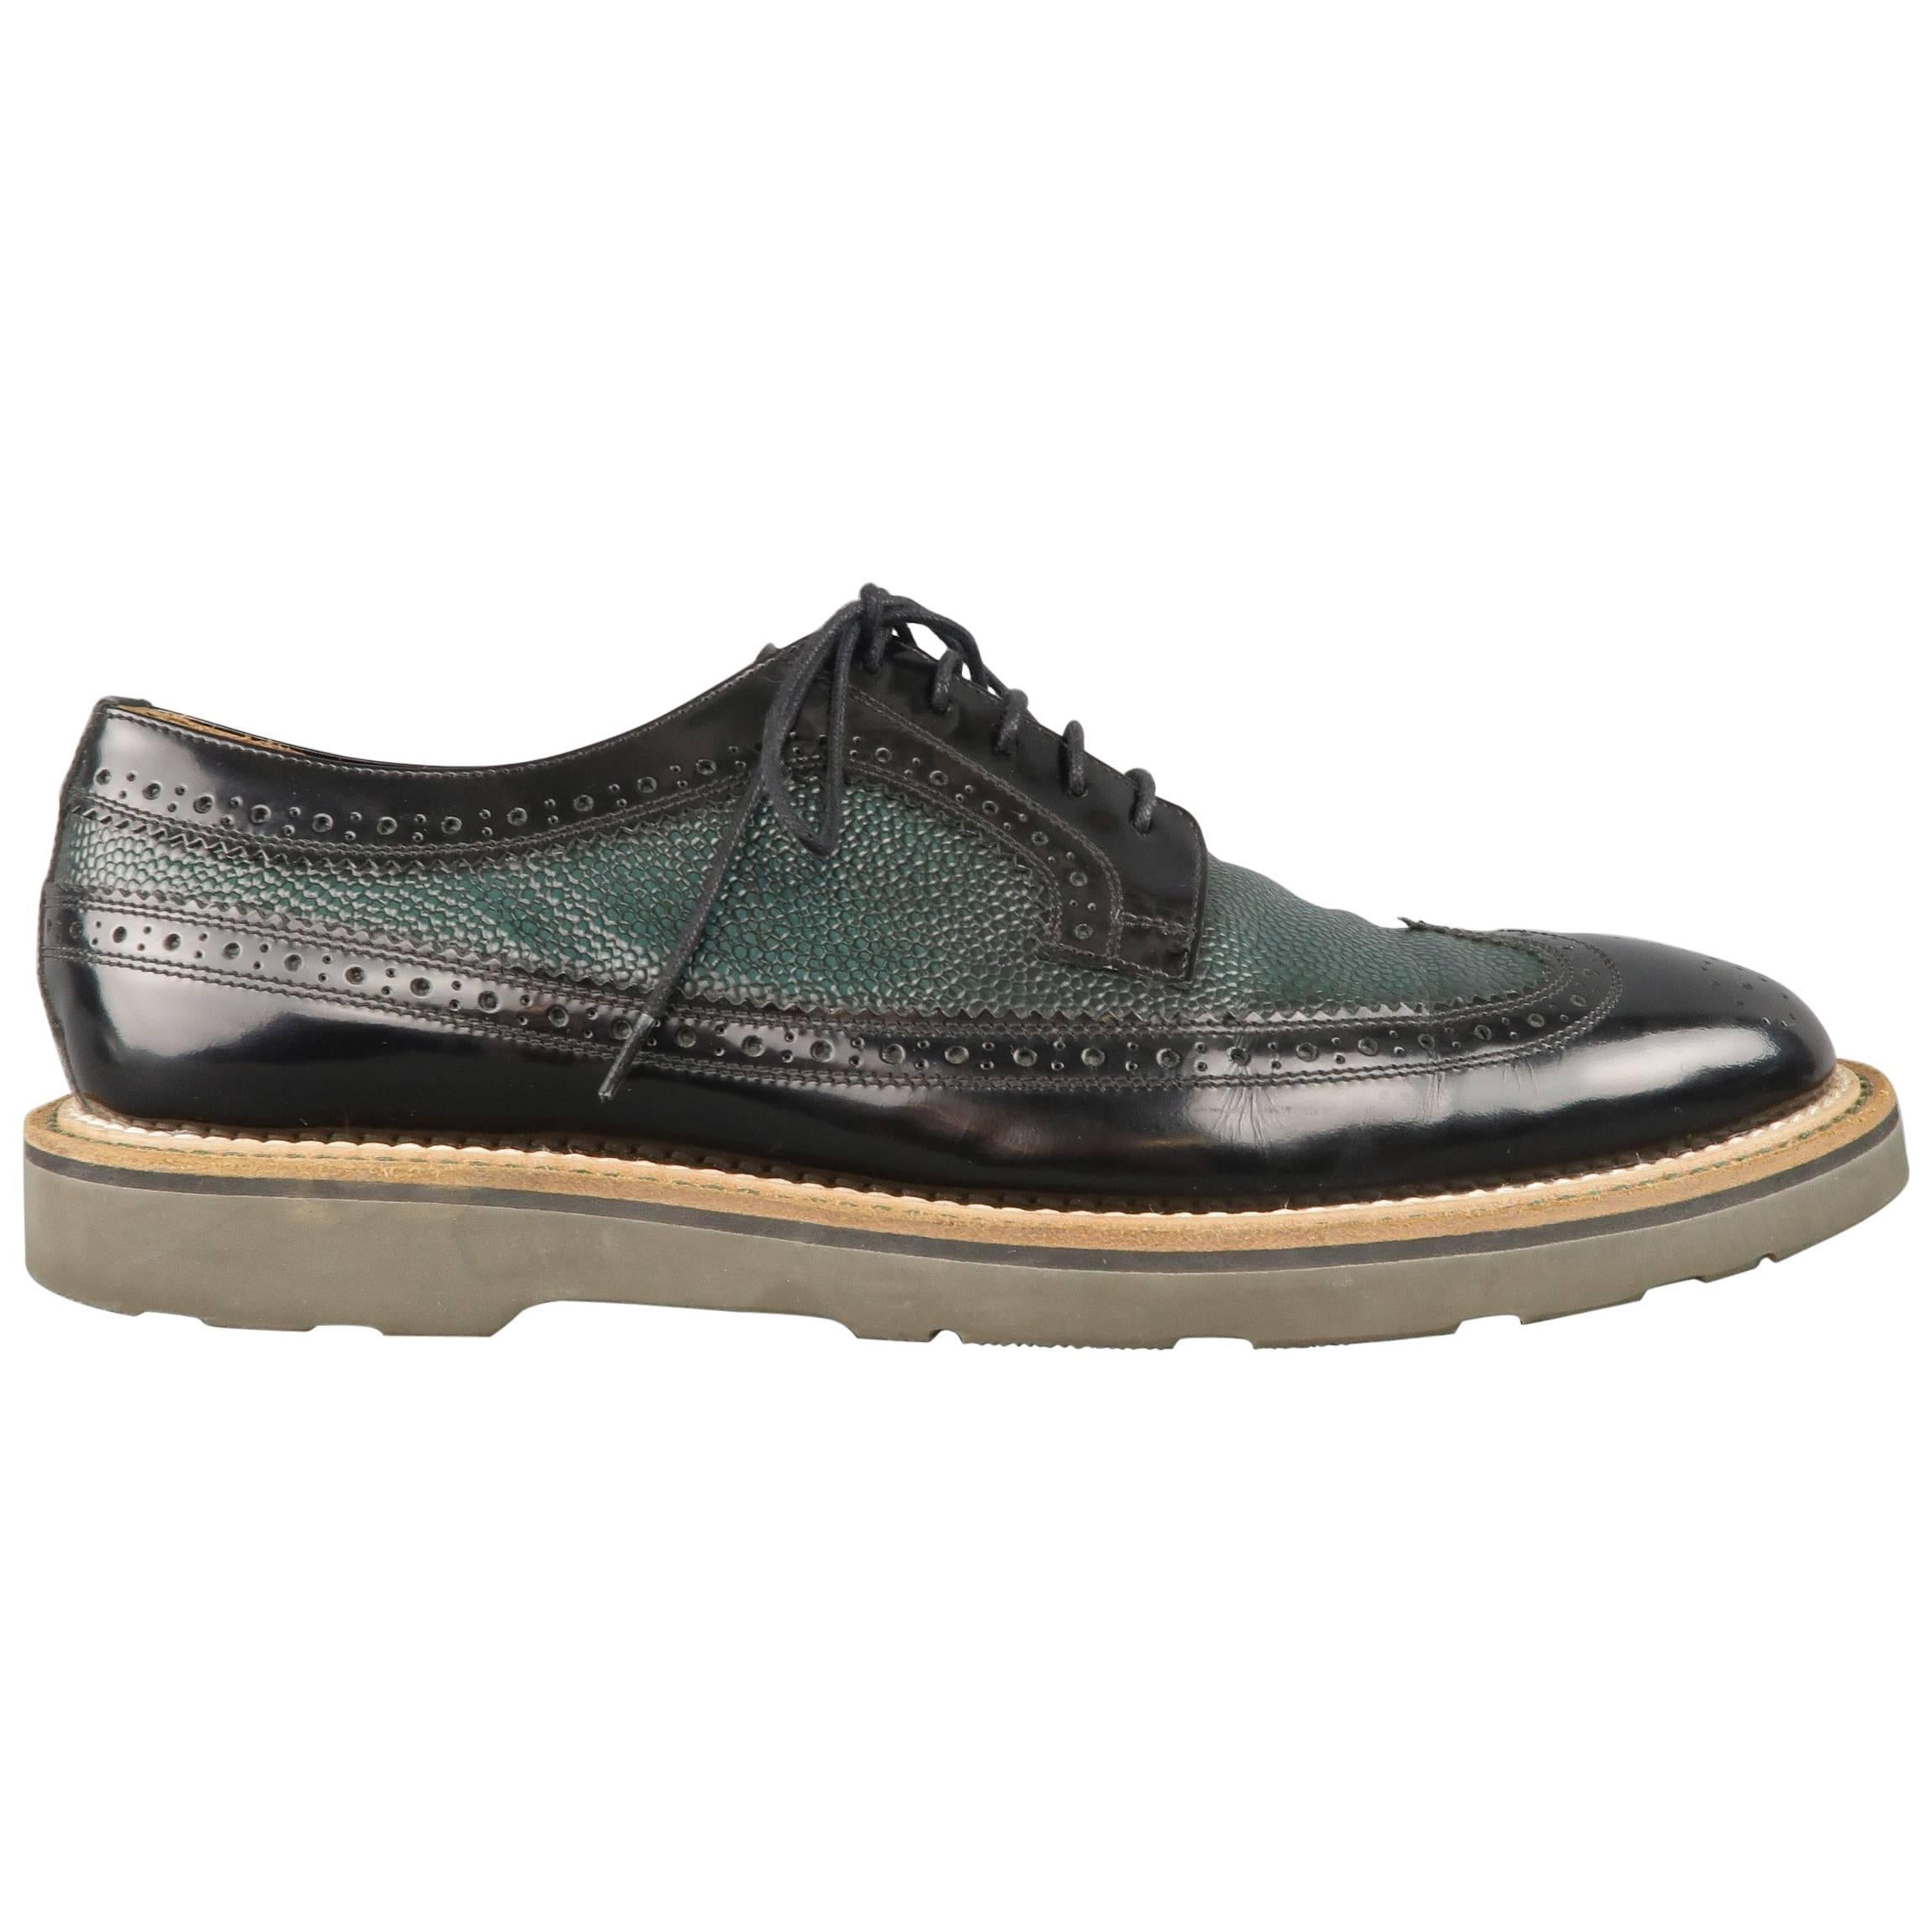 PAUL SMITH Size 10 Green & Black Perforated & Pebbled Leather Wingtip Lace Up